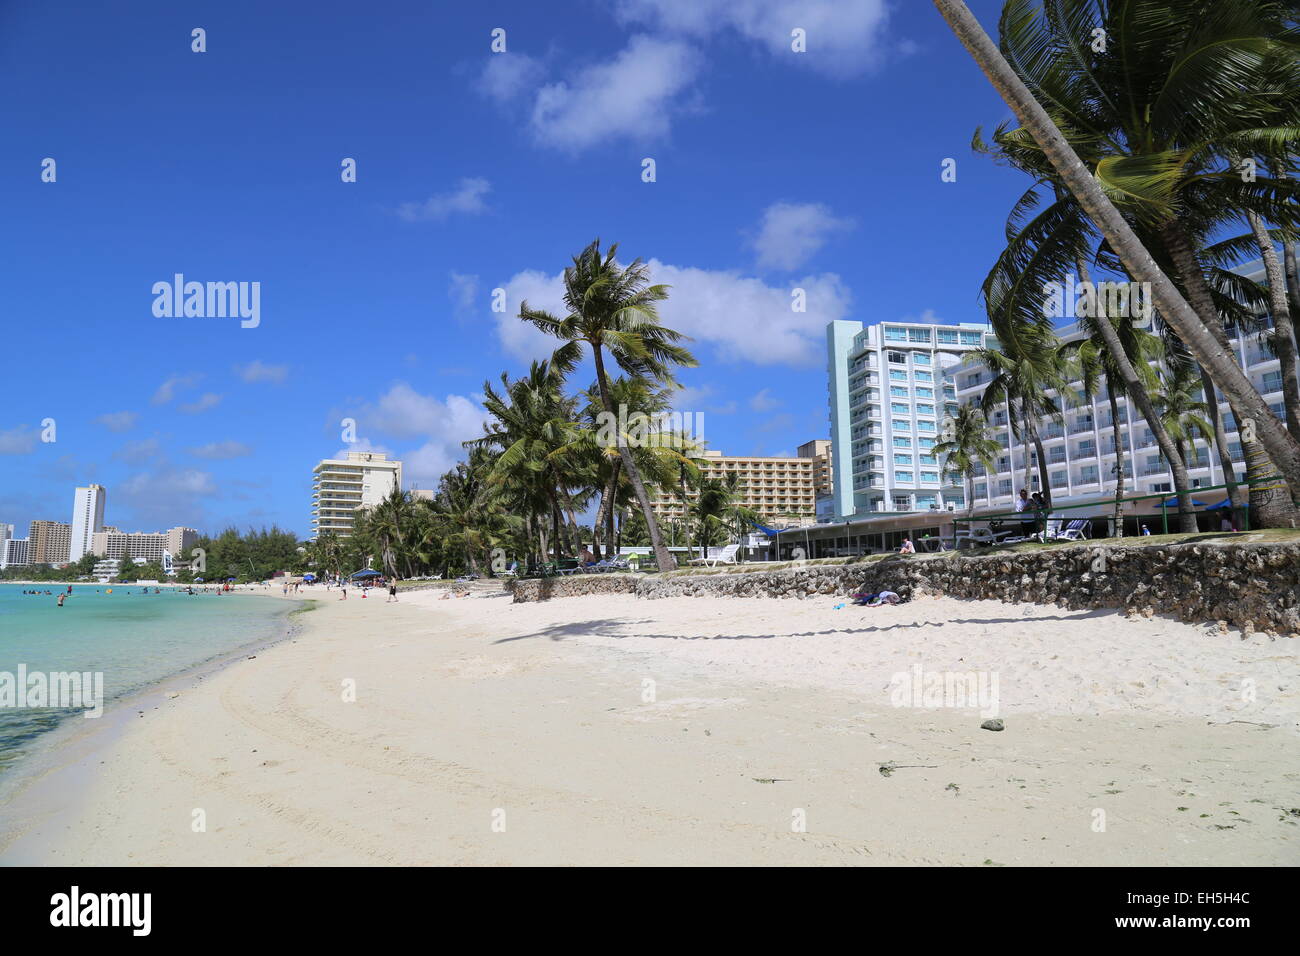 Hotels and Palm Trees in Guam - March 2015 Stock Photo